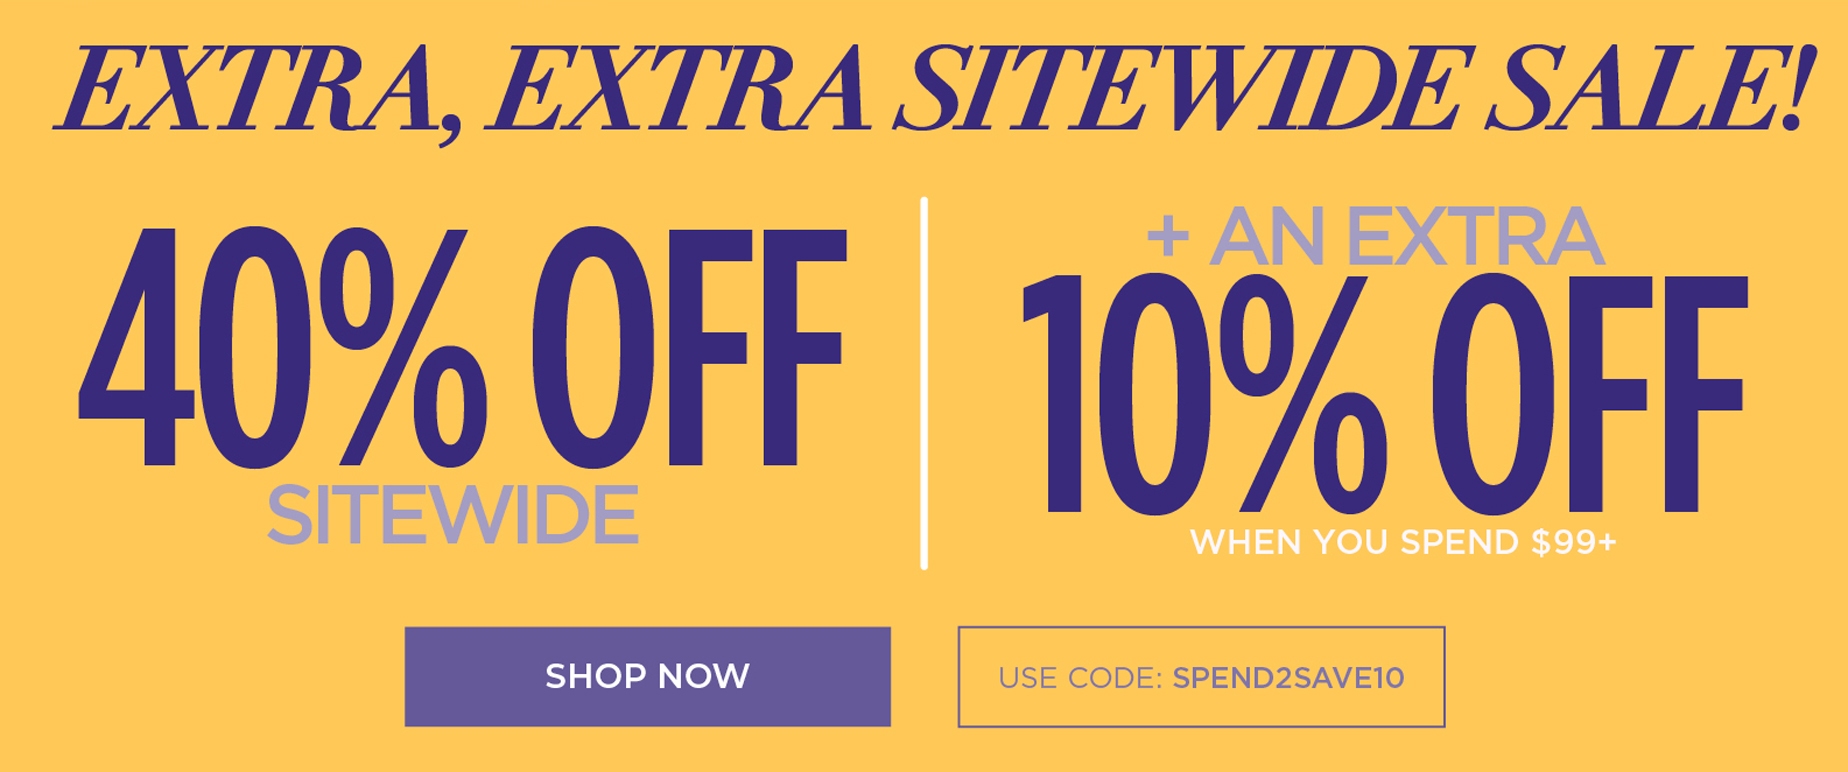 EXTRA EXTRA SITEWIDE SALE! 40% OFF SITEWIDE PLUS AN EXTRA 10% OFF when you use code: SPEND2SAVE10